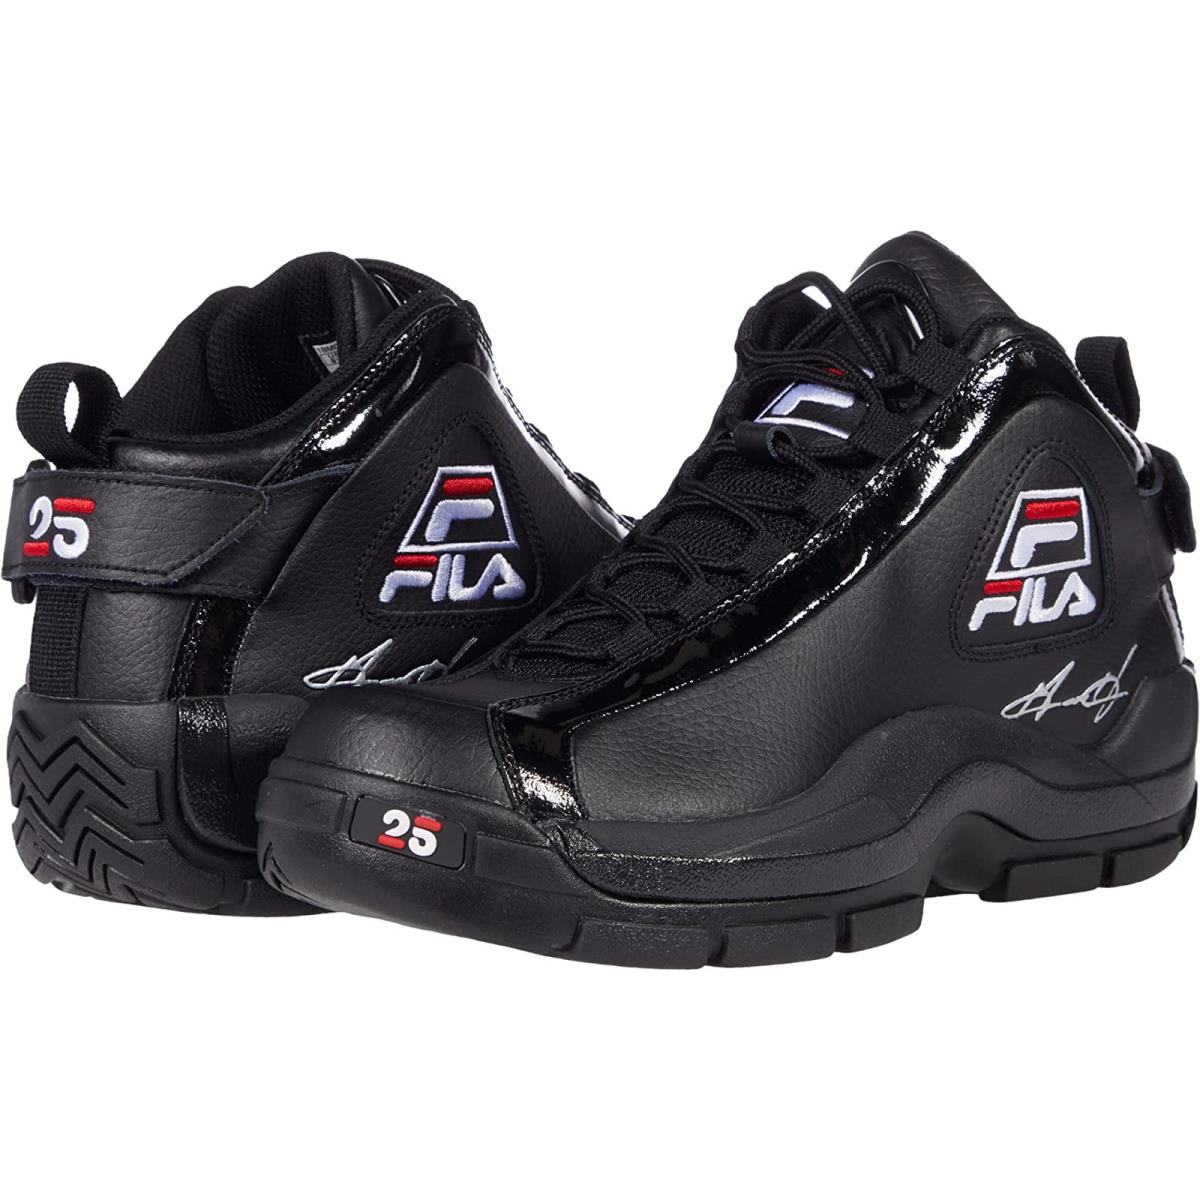 Man`s Sneakers Athletic Shoes Fila Grant Hill 2 25th Anniversary Black/White/Fila Red